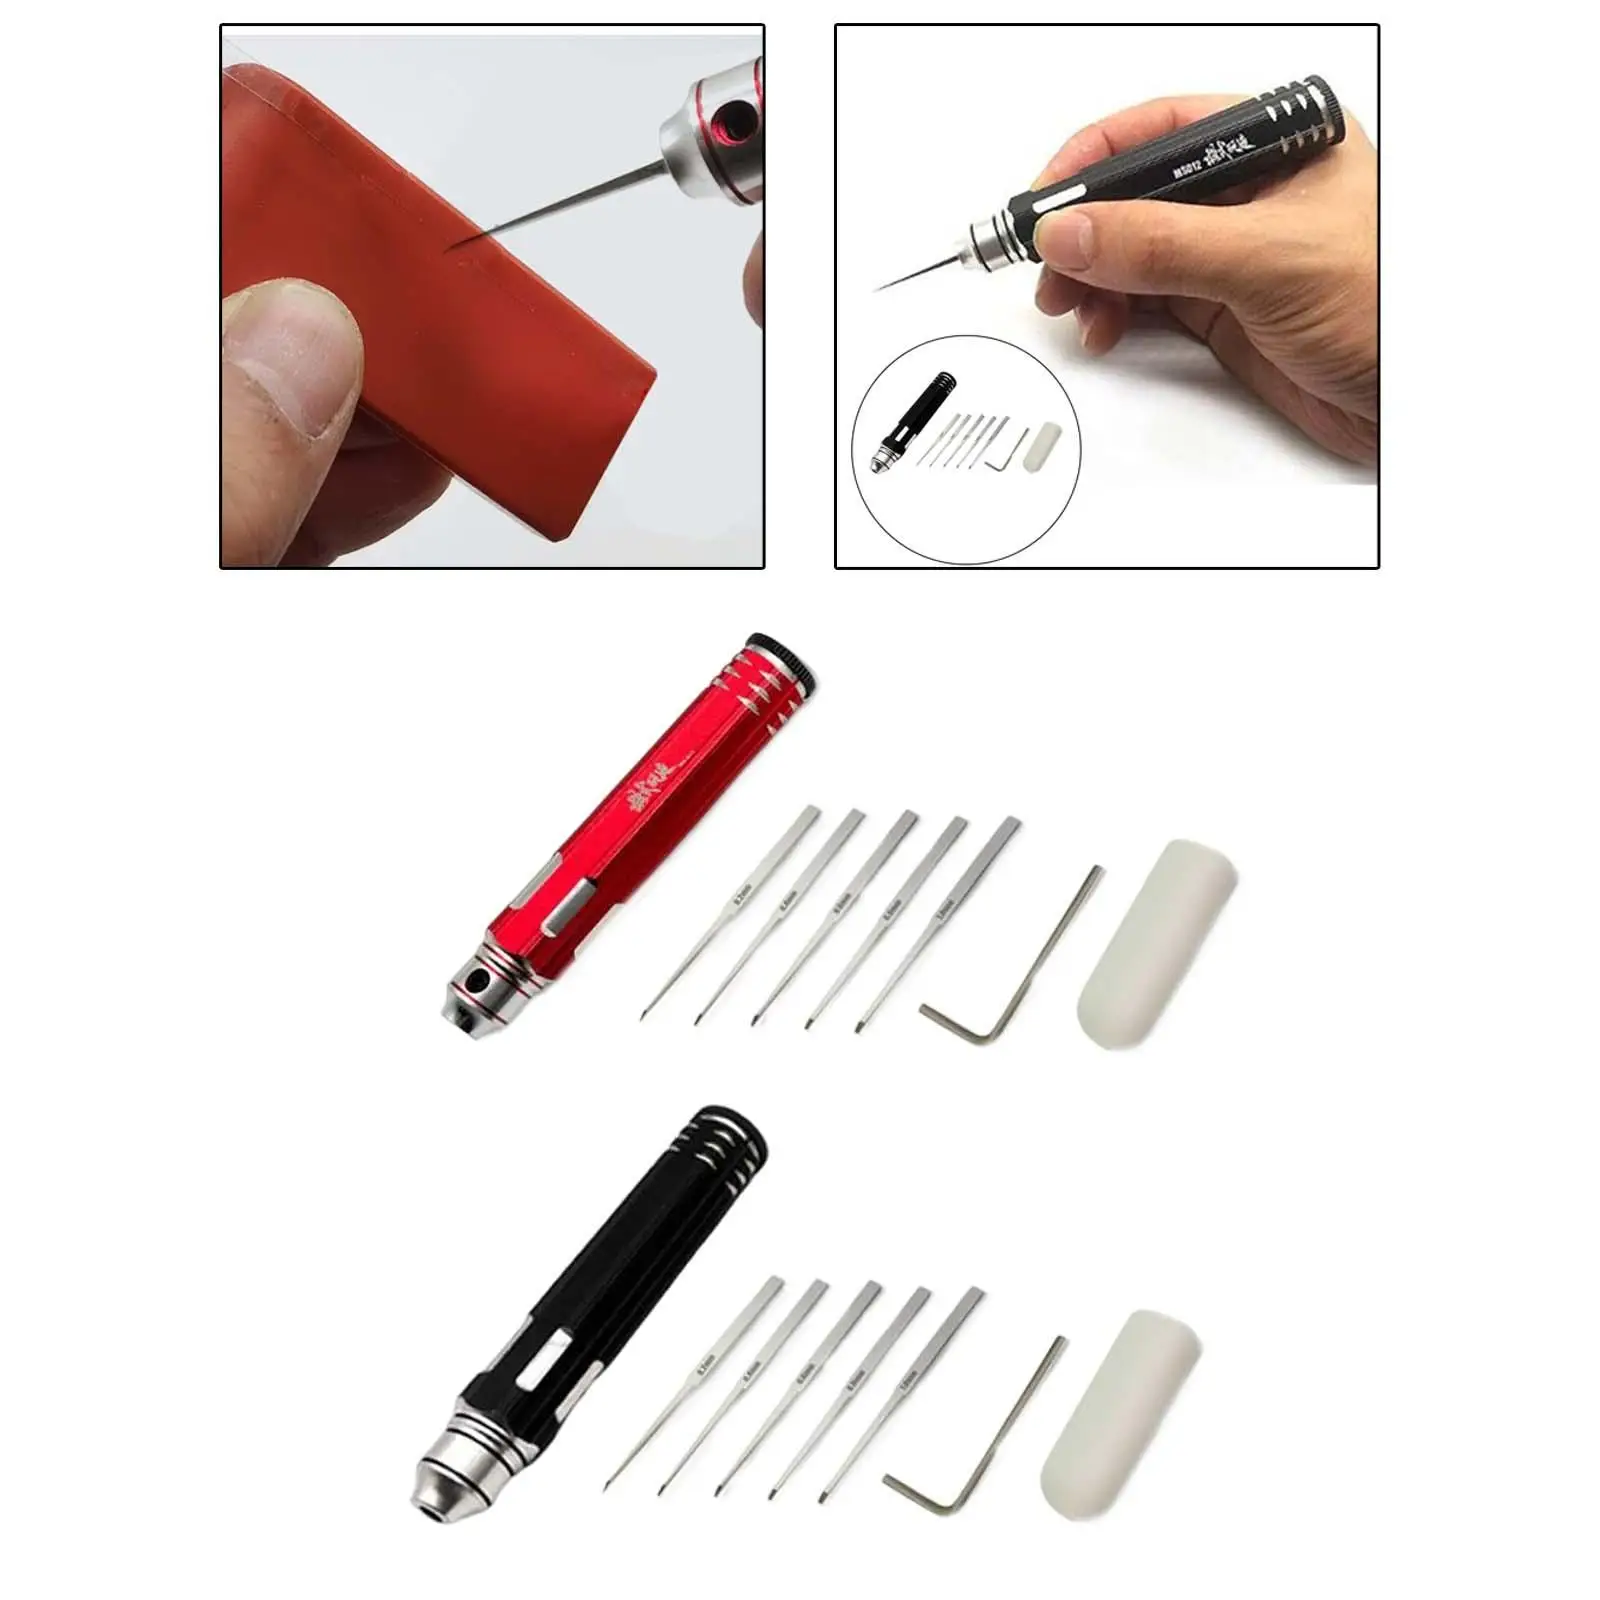 Model Scriber with Blade with 0.2/0.4/0.6/0.8/1mm Blade Scribe Line Tool Model DIY Cutting Tools for RC Car Repairing Cutting